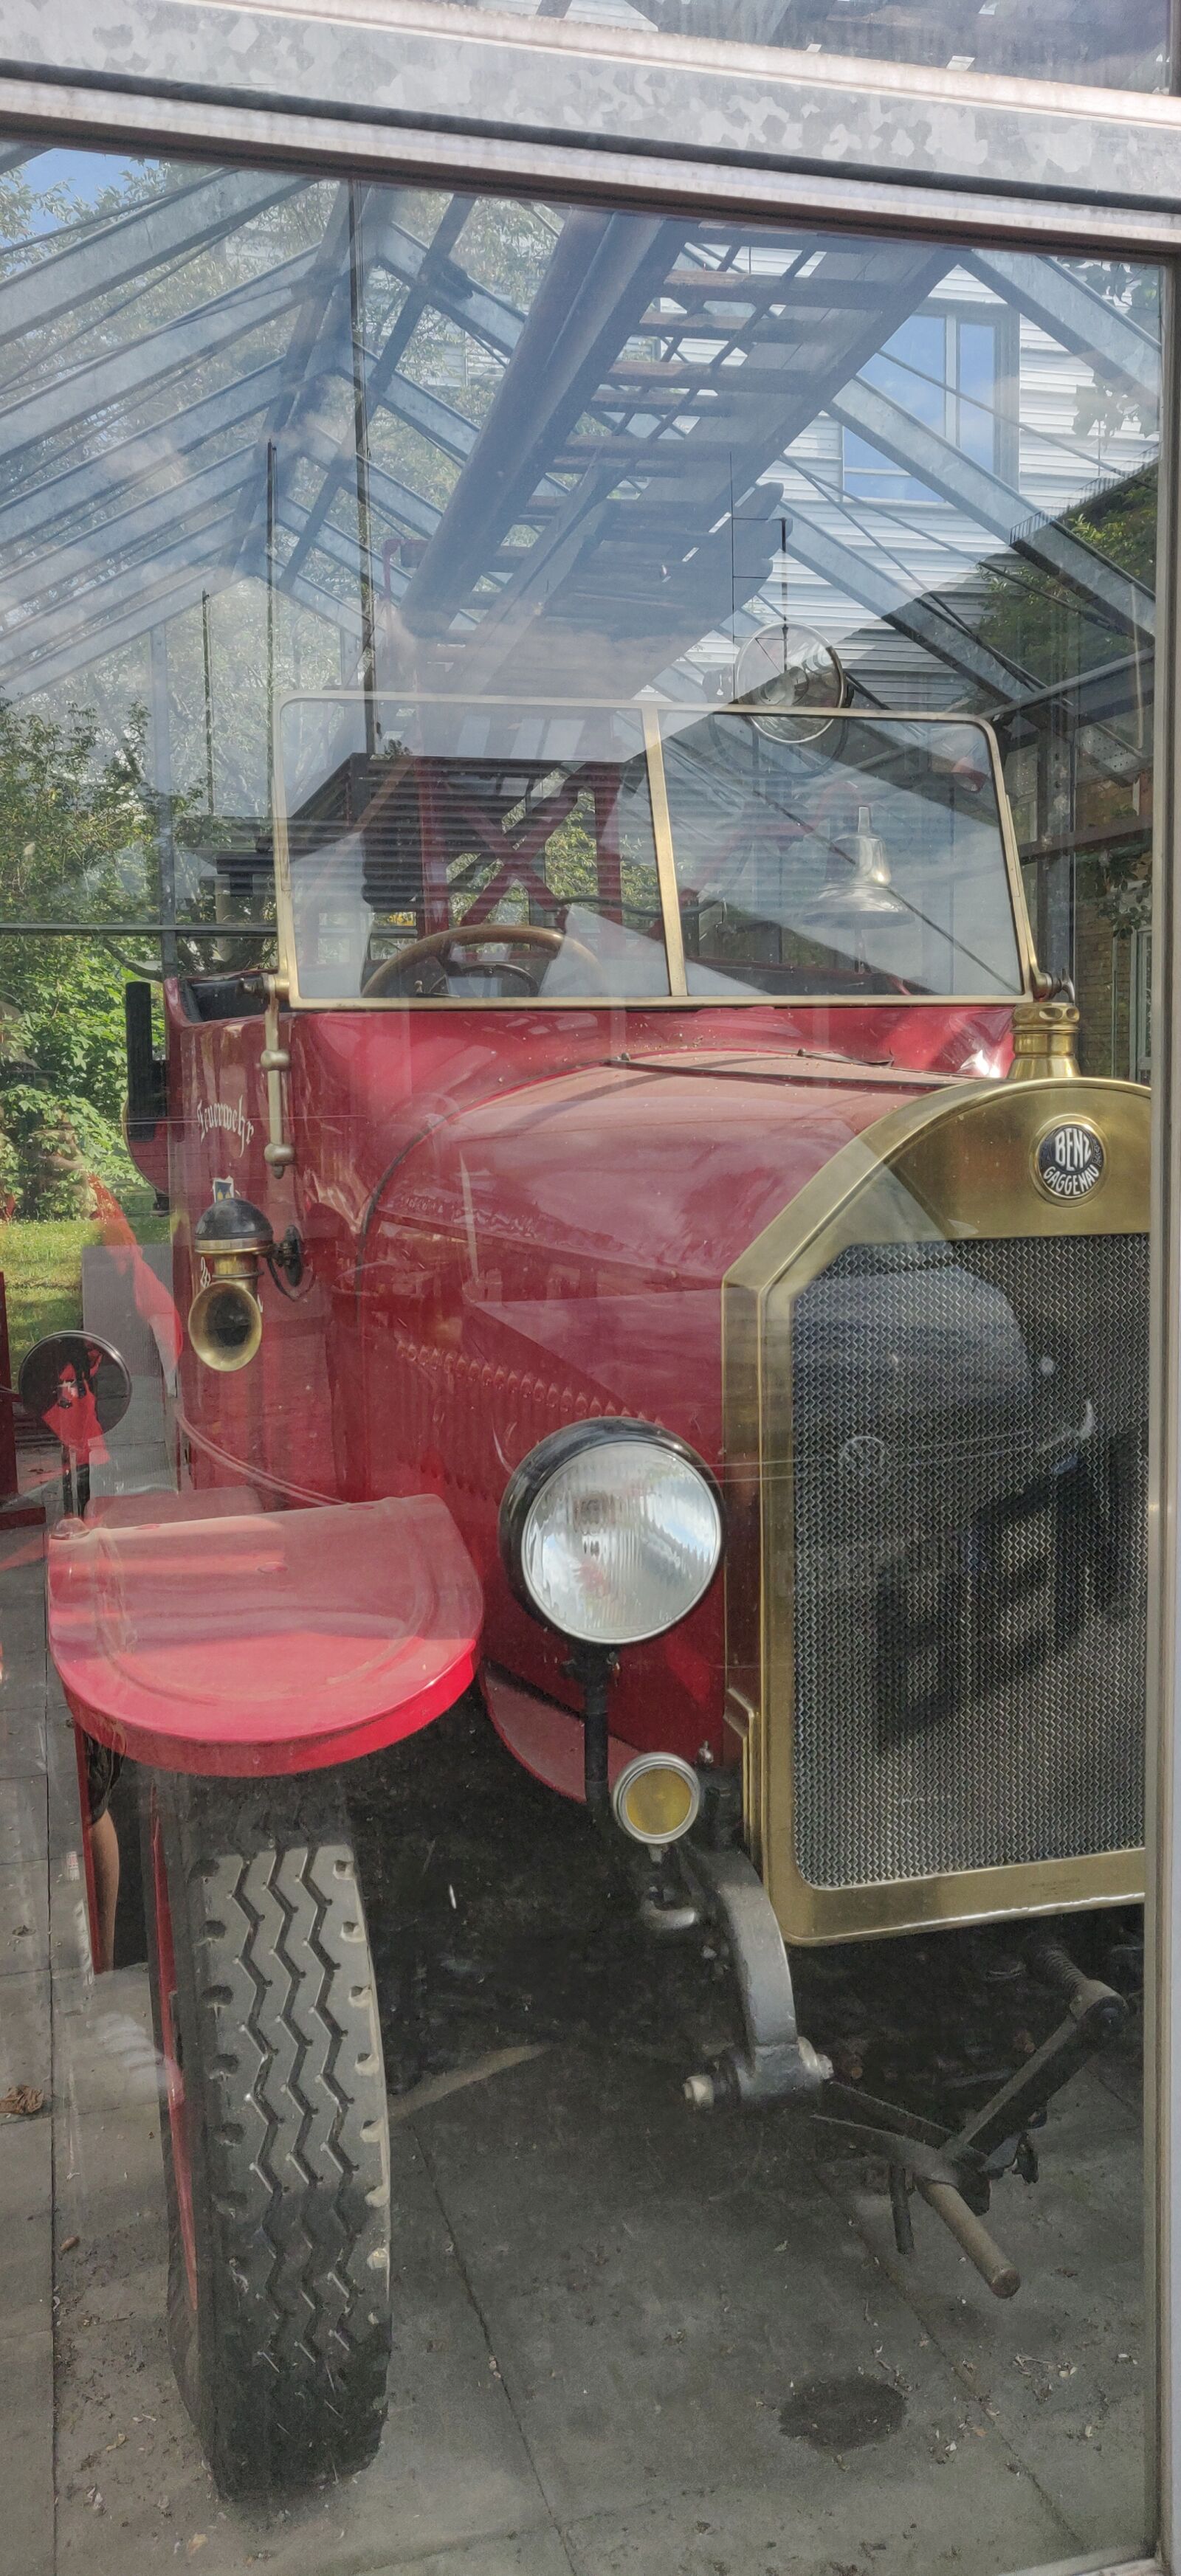 OnePlus 6T sample photo. Firetruck, wiesbaden, old photography